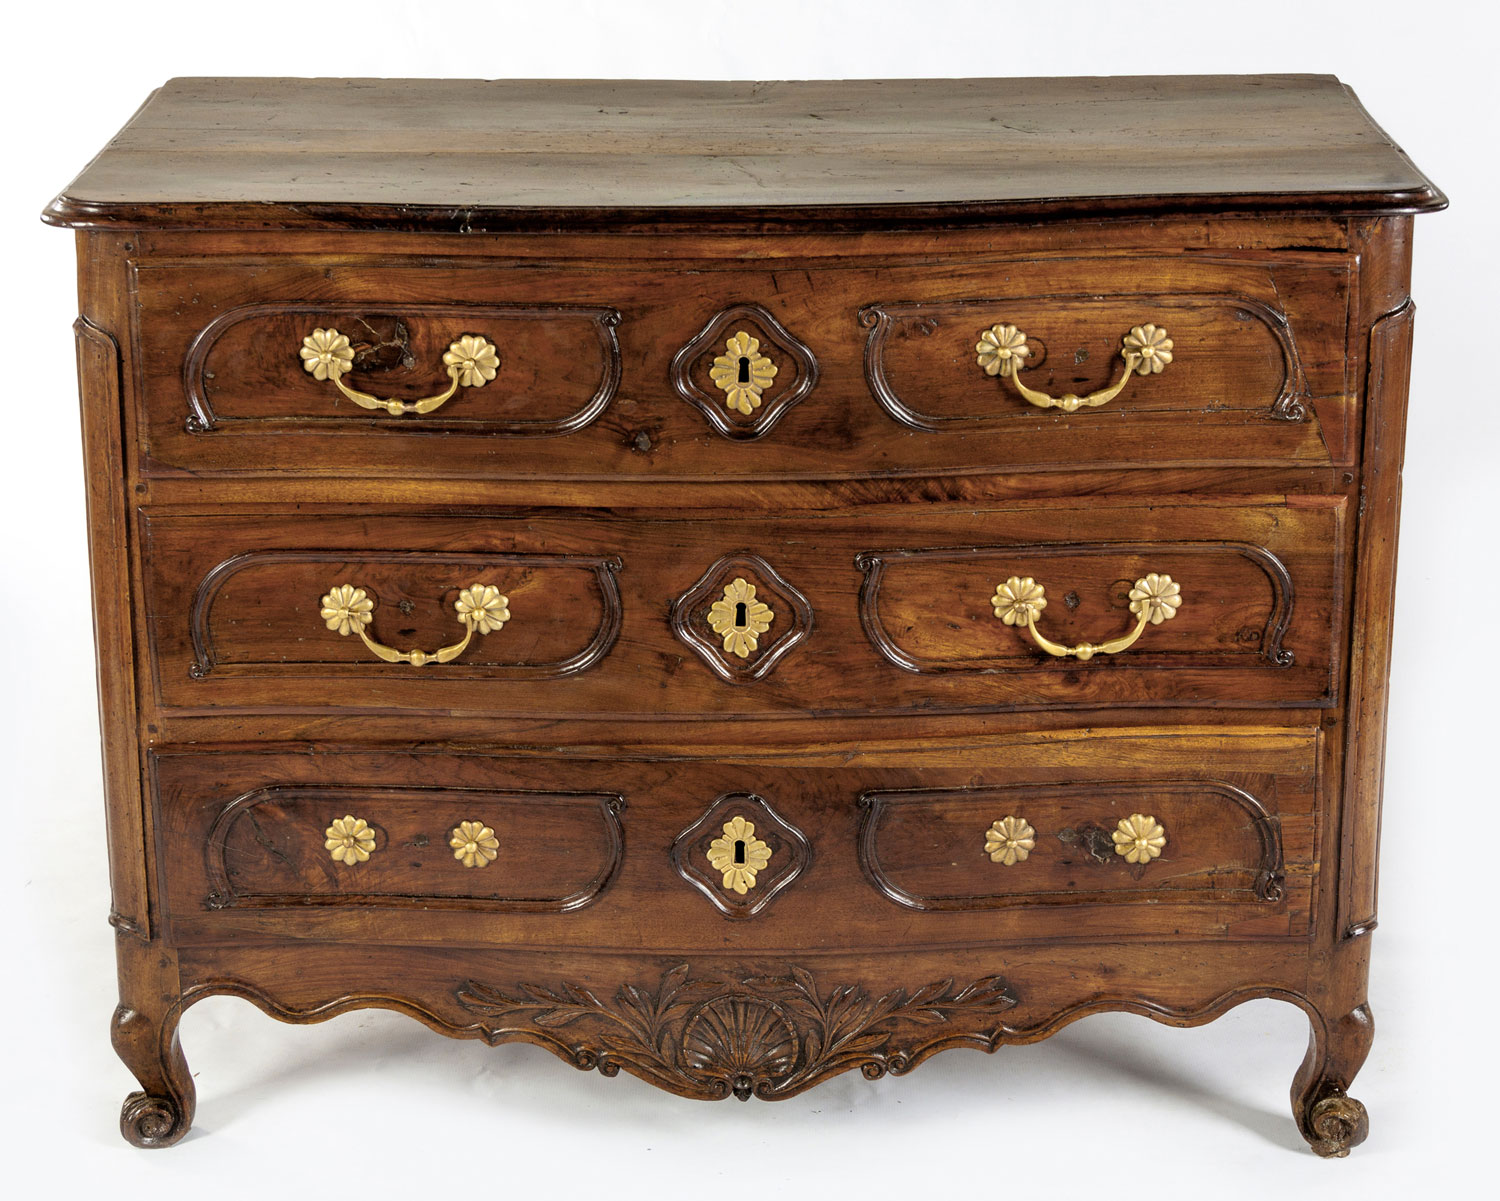 A FRENCH OAK CHEST-OF-DRAWERS, 19TH CENTURY